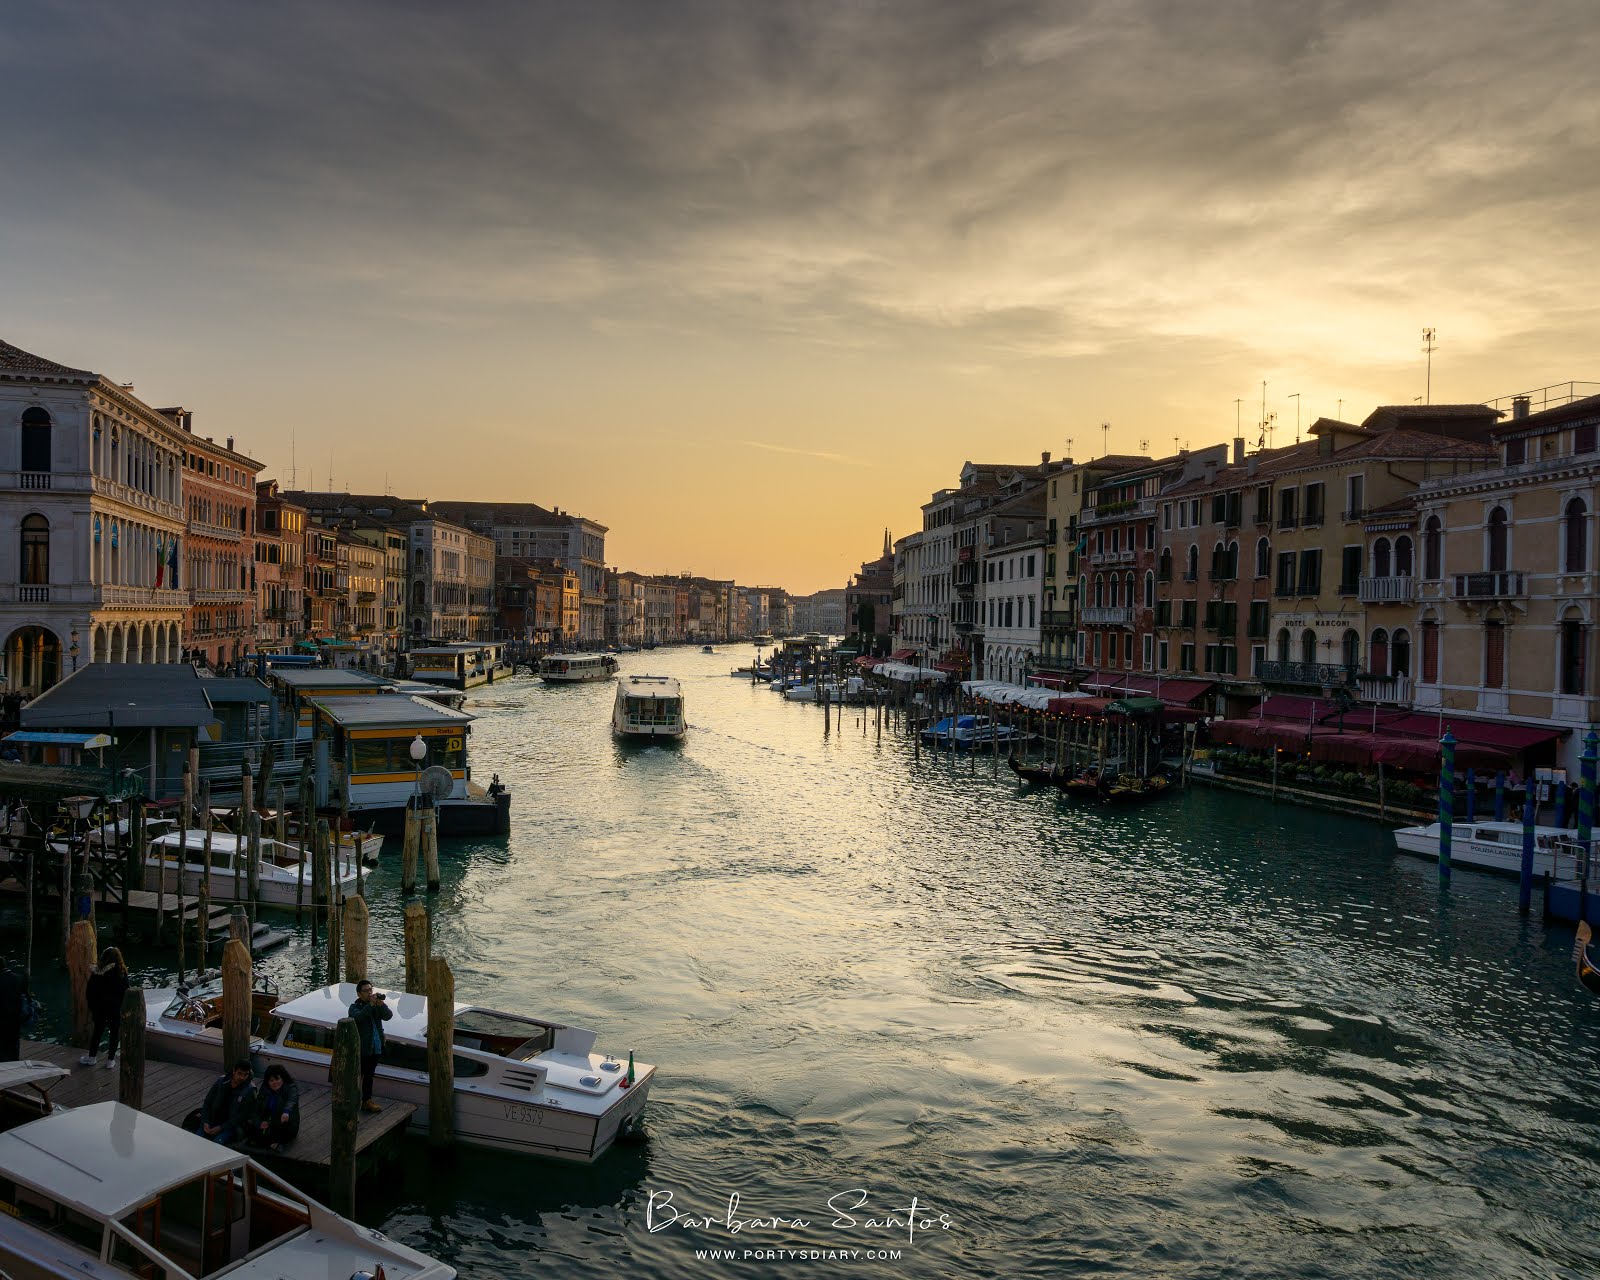 Travel - A weekend in Venice, Italy. All photos taken with Sony a6000 by Bárbara Santos for www.portysdiary.com